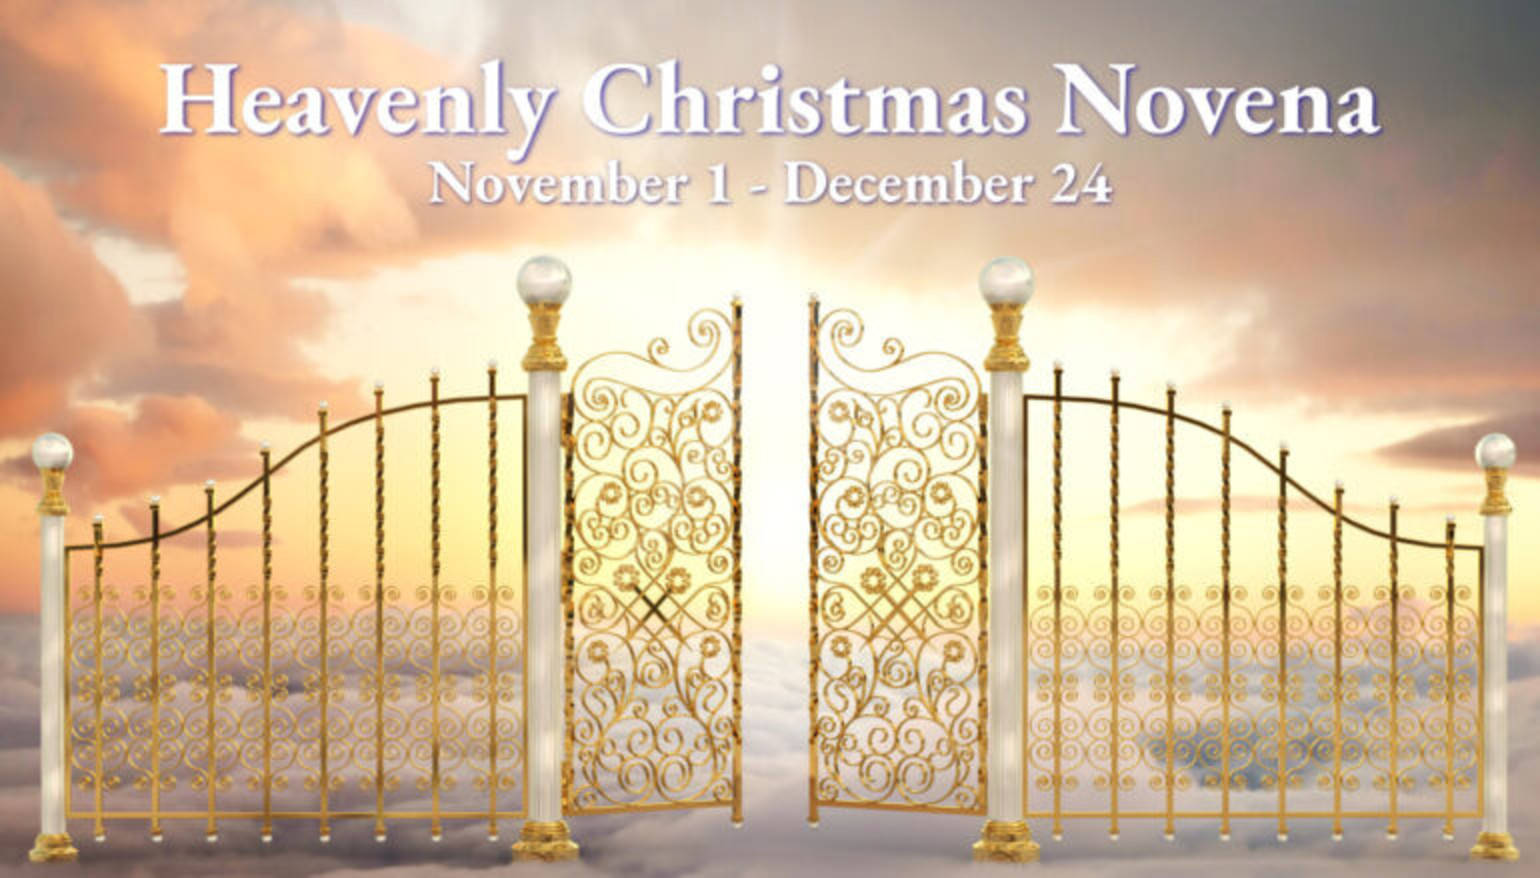 Heavenlychristmasgraphic Scaled 770x439 C